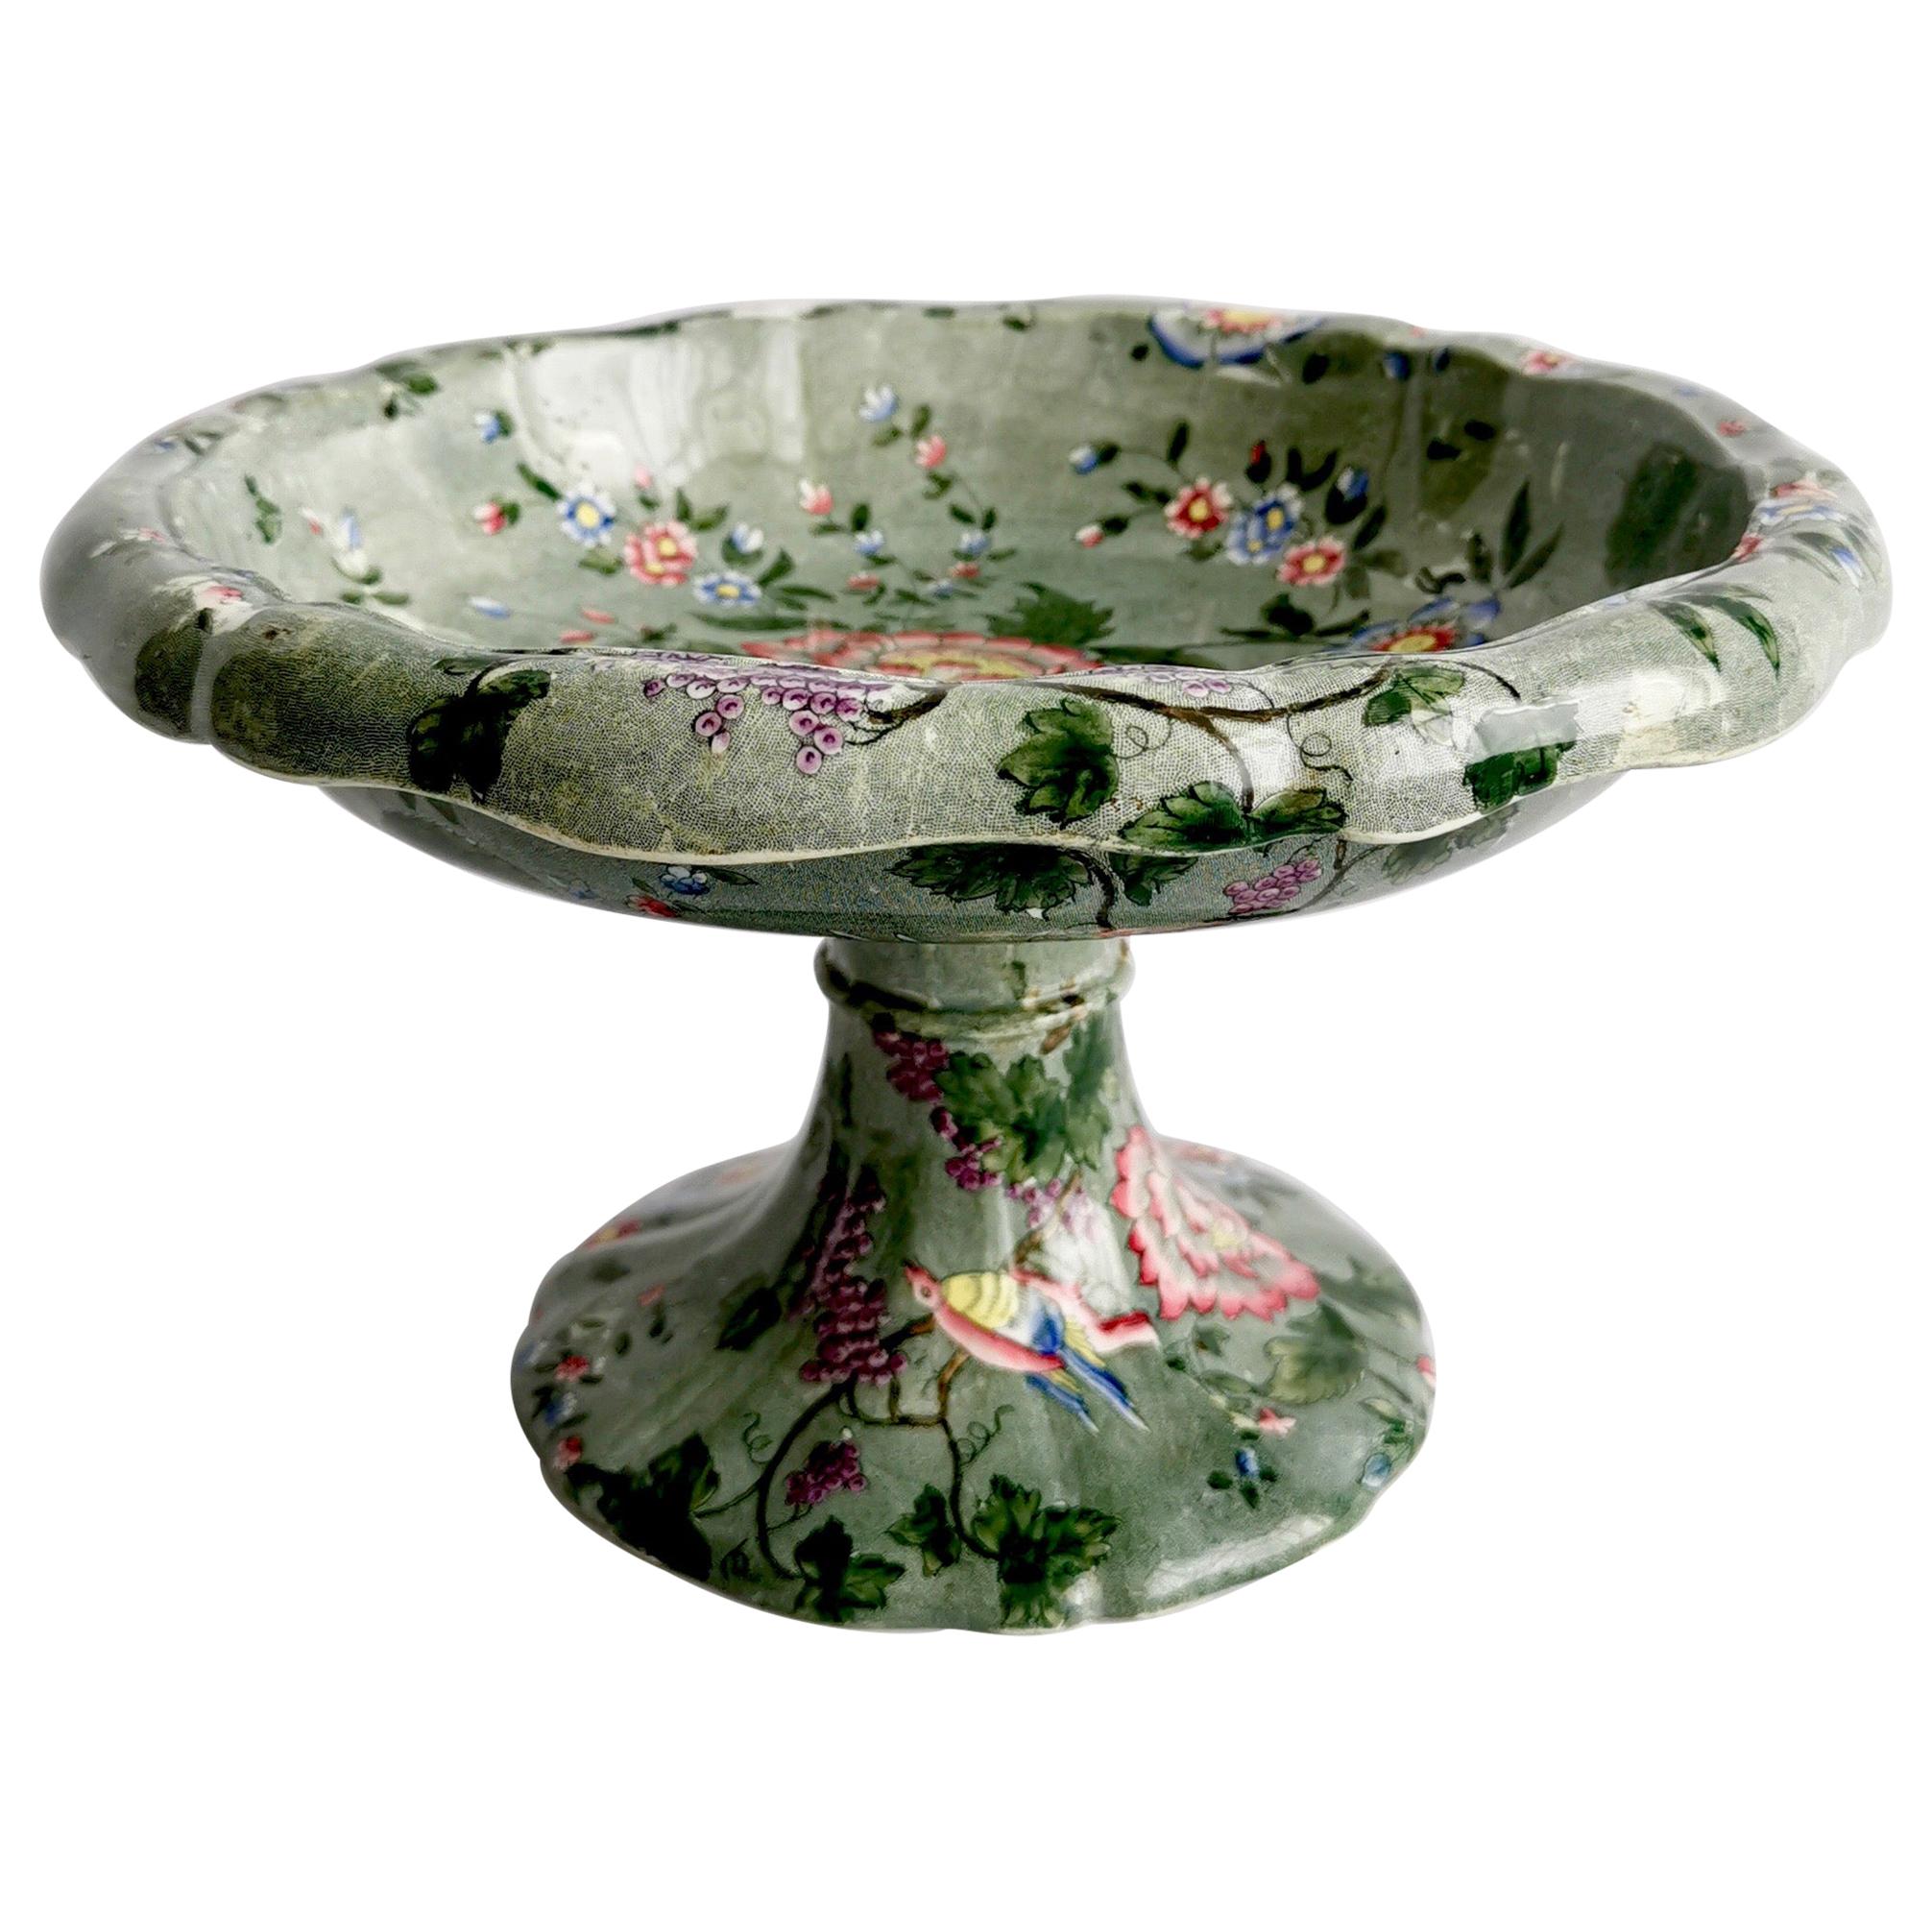 Spode's New Fayence Tazza, Green Chinoiserie Flowers and Birds, Regency, 1829